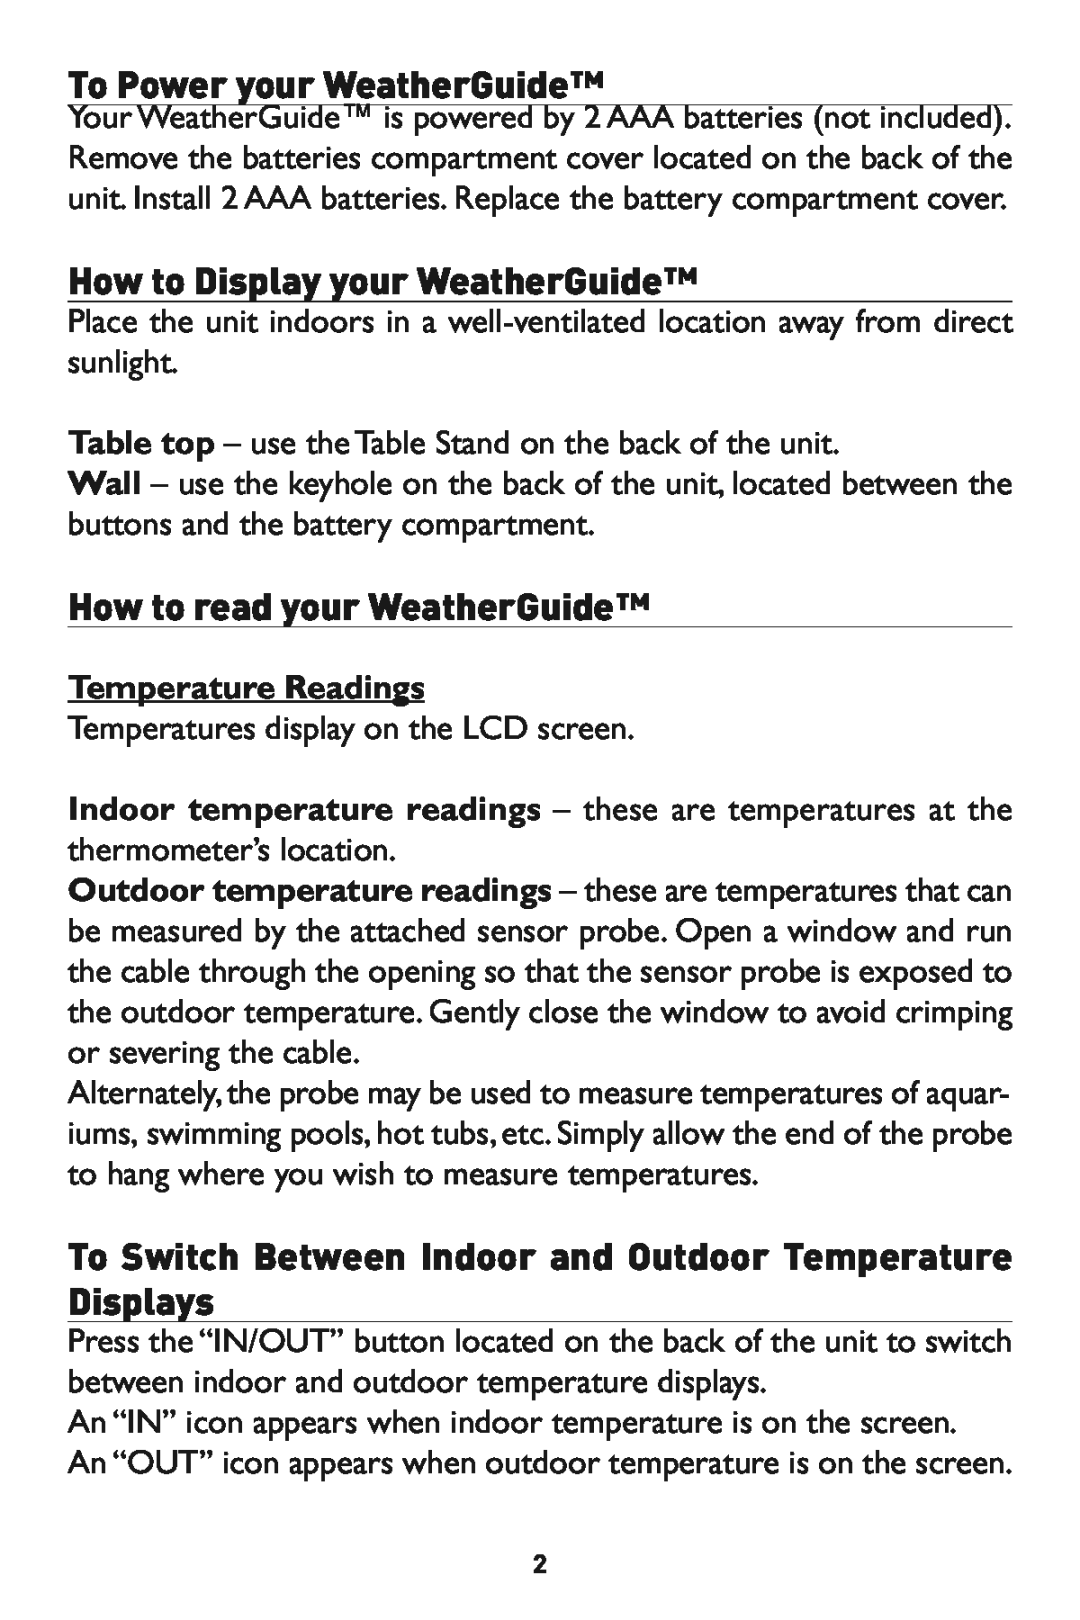 Taylor 1521 How to read your WeatherGuide, Display your WeatherGuide, To Switch Between Indoor and Outdoor Temperature 